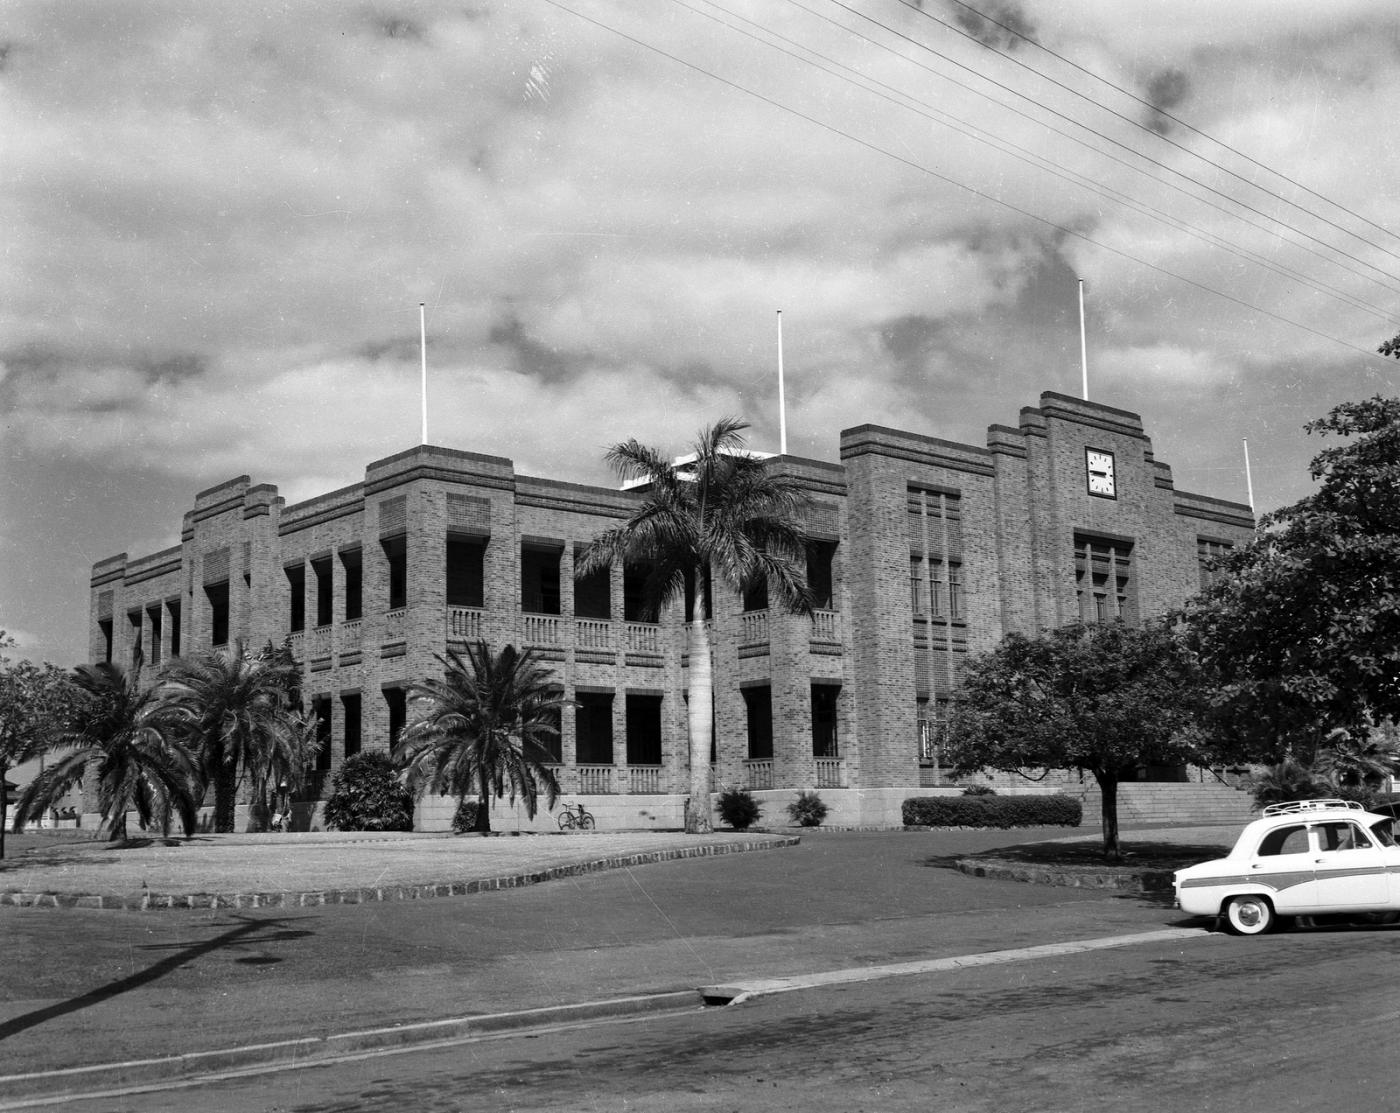 View of the exterior of Rockhampton bricked town hall